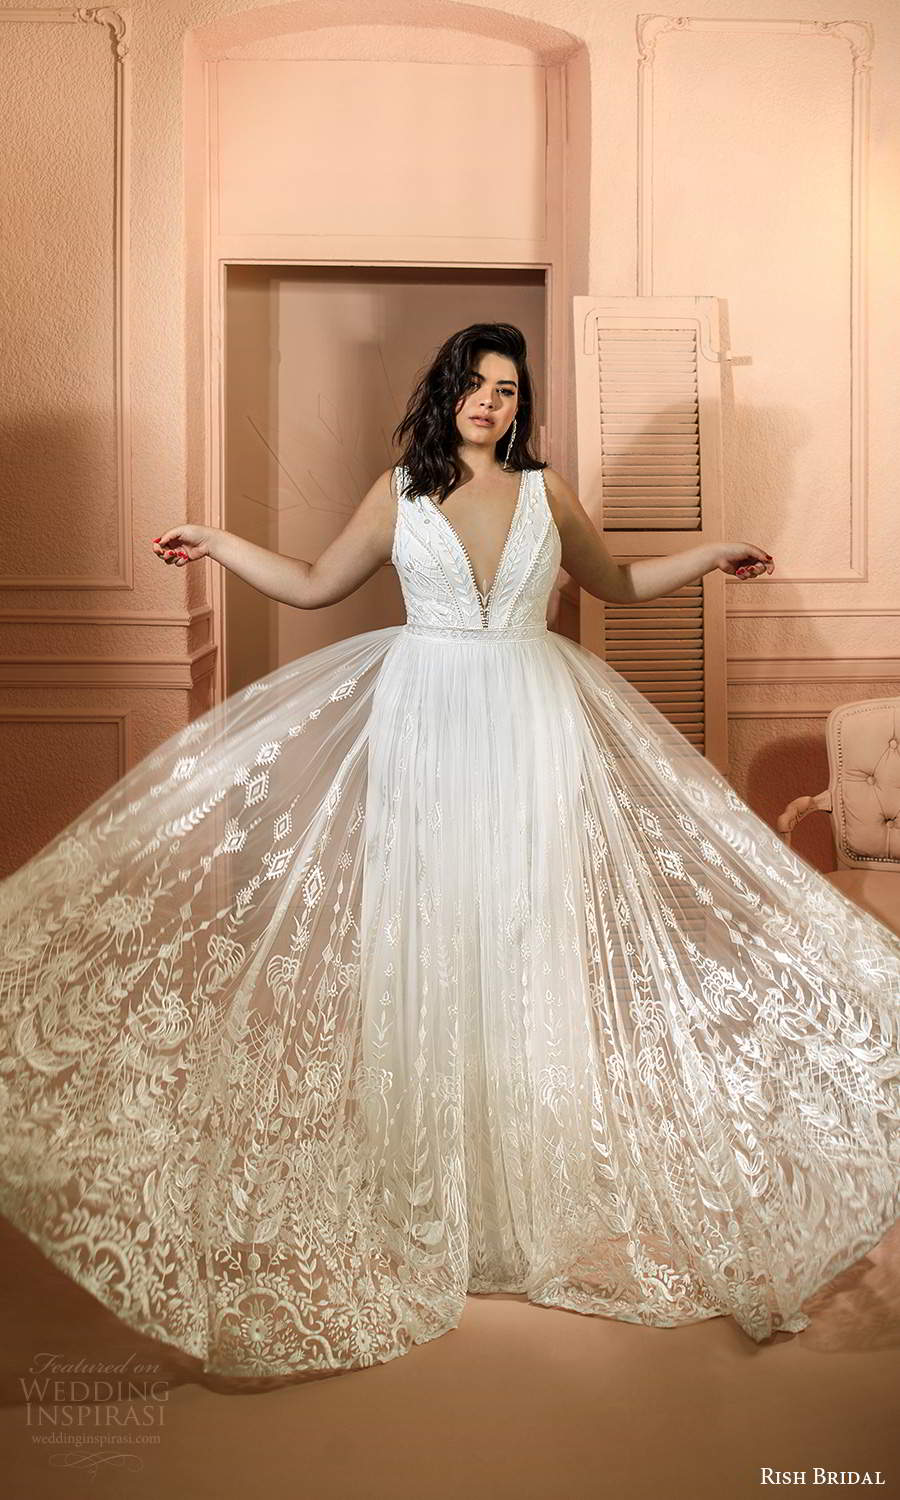 rish bridal 2021 bridal sleeveless thick straps plunging v neckline fully embellished a line lace ball gown plus wedding dress chapel train (5) mv